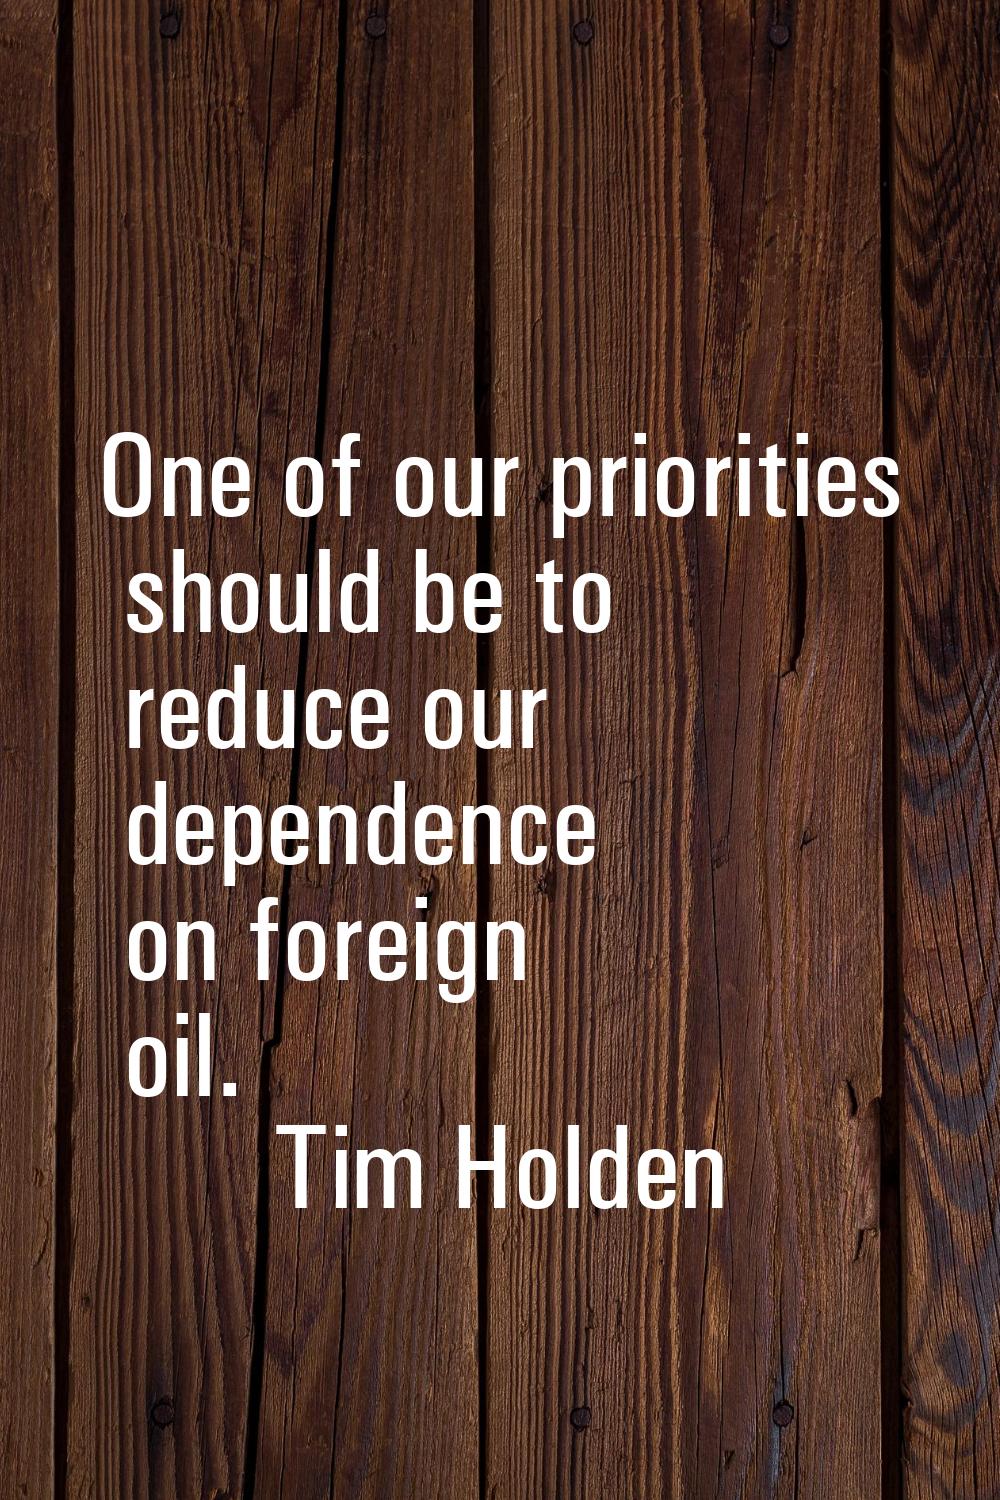 One of our priorities should be to reduce our dependence on foreign oil.